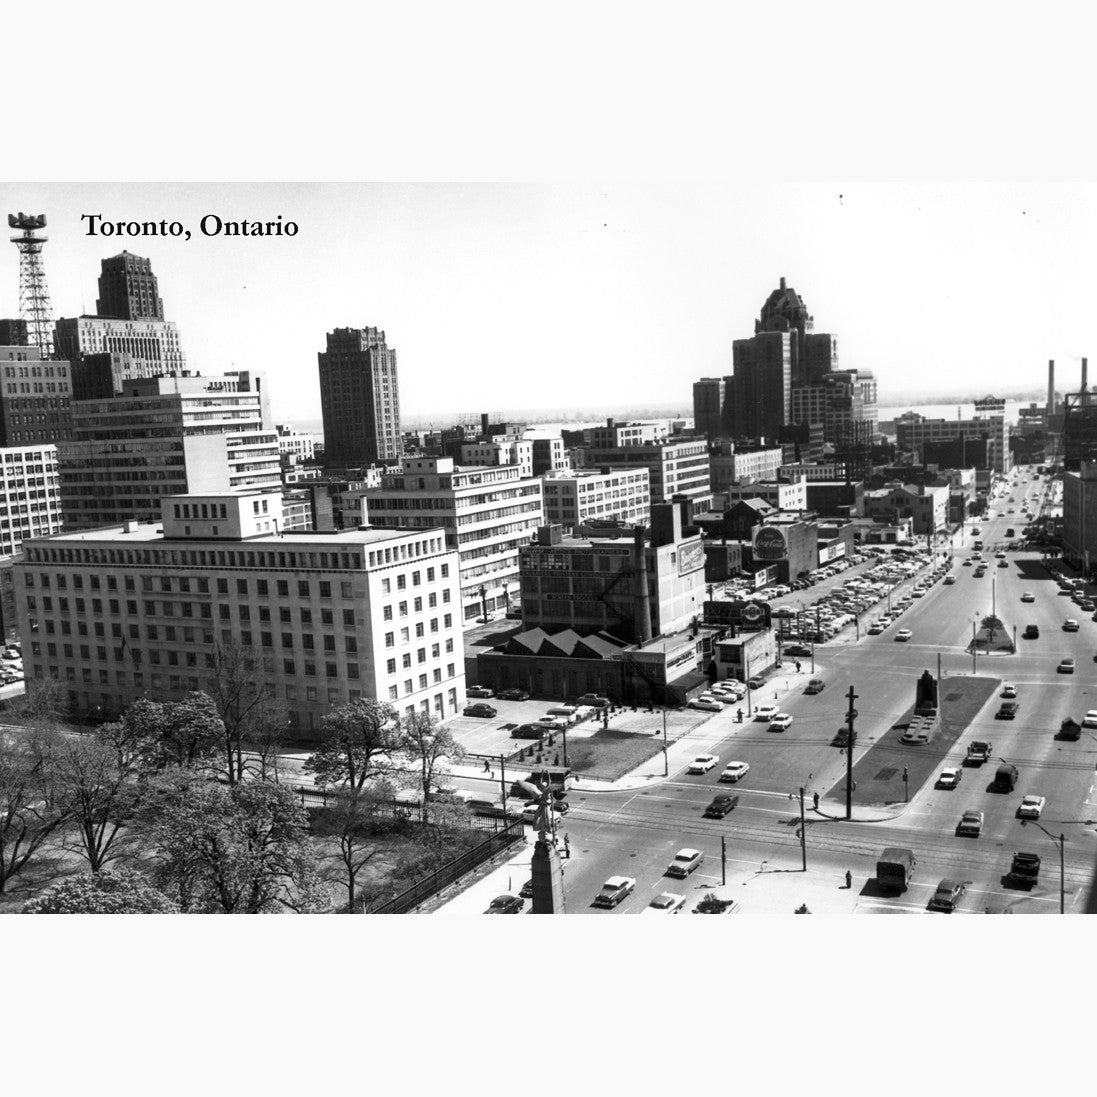 Sounthern view from Canada Life Building to the Toronto core and Paramount Royal York Hotel circa 1954